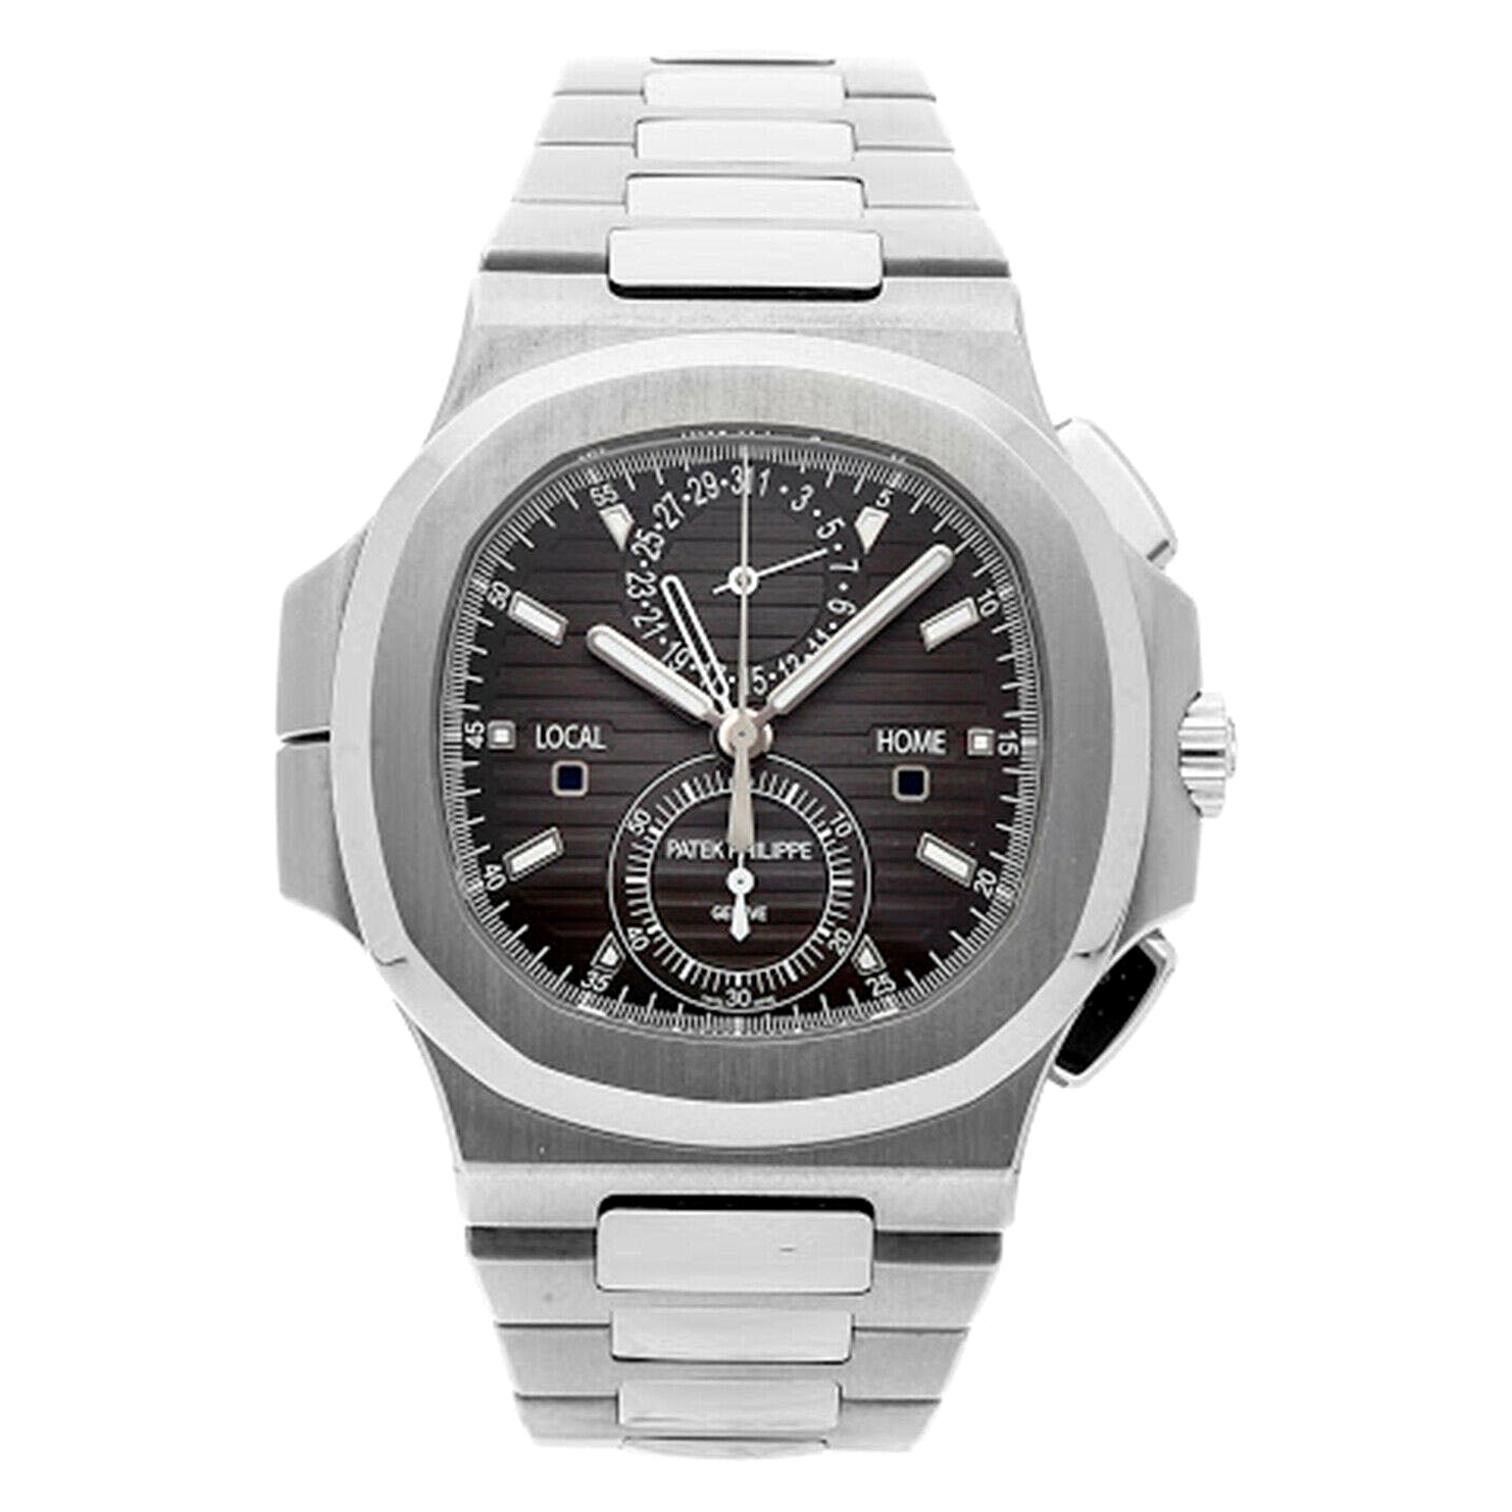 Brand New Patek Philippe Nautilus 5990/1A-001 Stainless Steel Watch